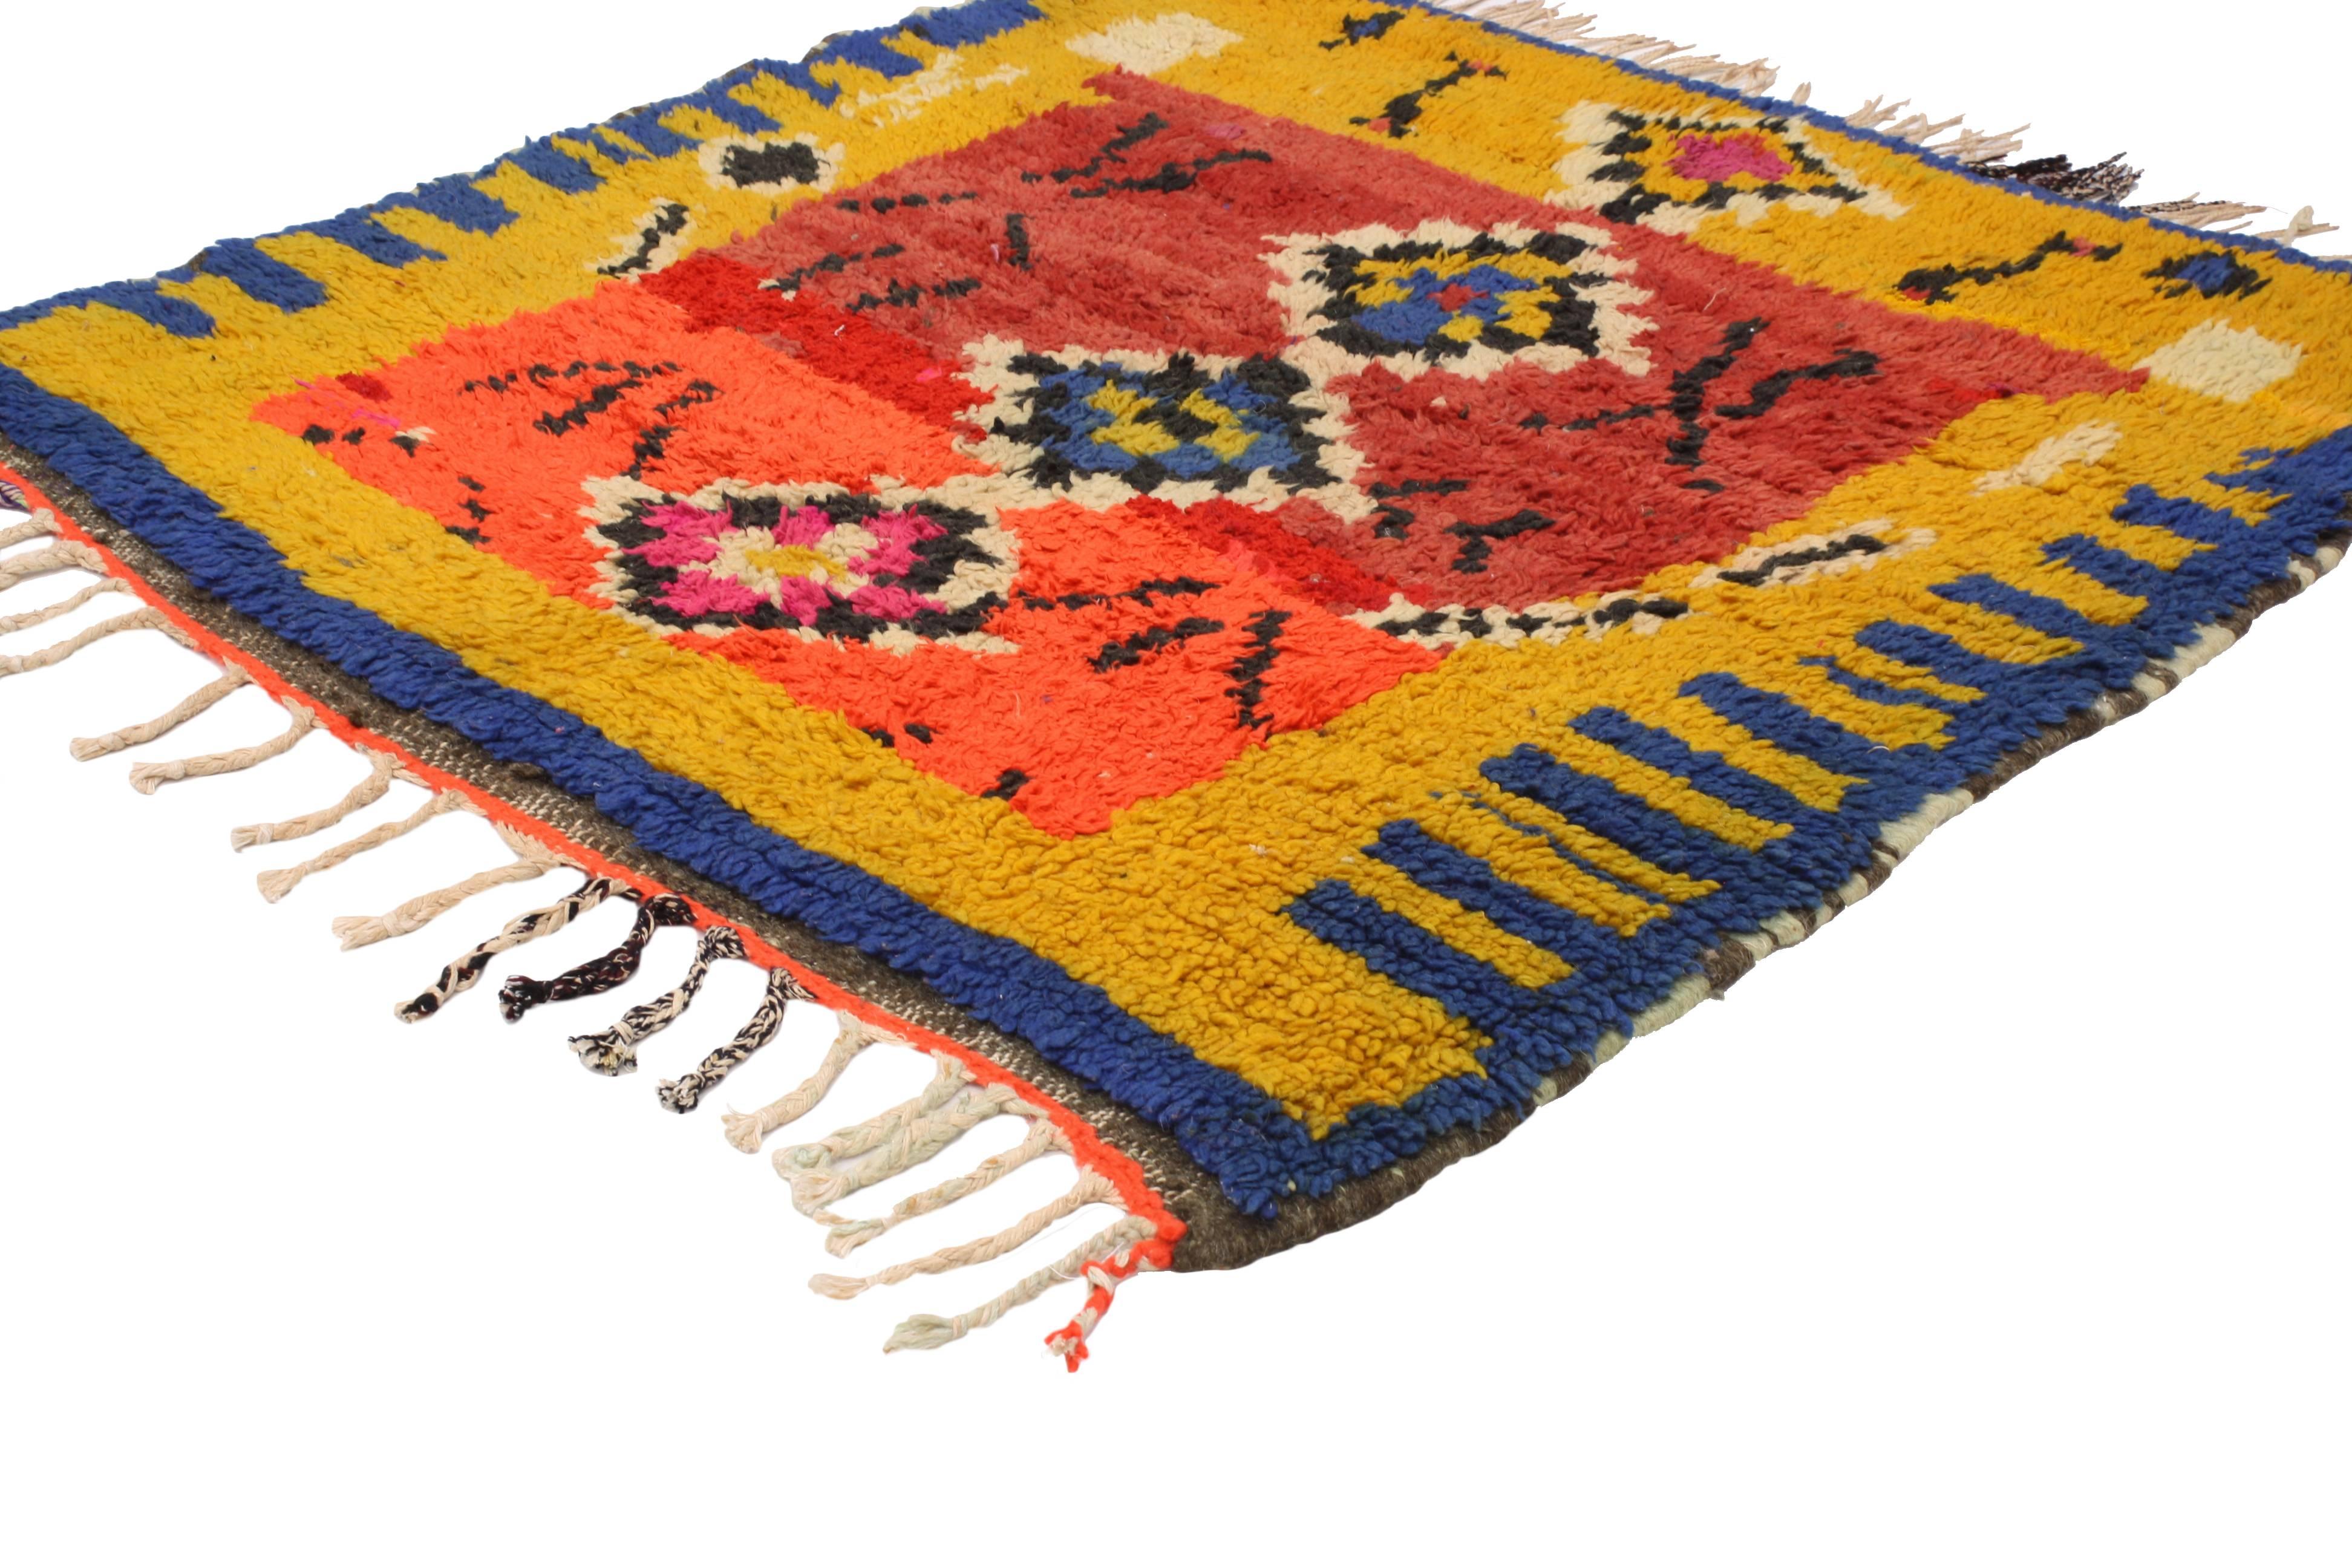 With its boho chic style and Primitive charm, this vintage Berber Moroccan rug with modern tribal design conveys a sense of beauty and mystery. Impeccably woven from hand-knotted wool in vibrant colors, this Moroccan rug does an excellent job of